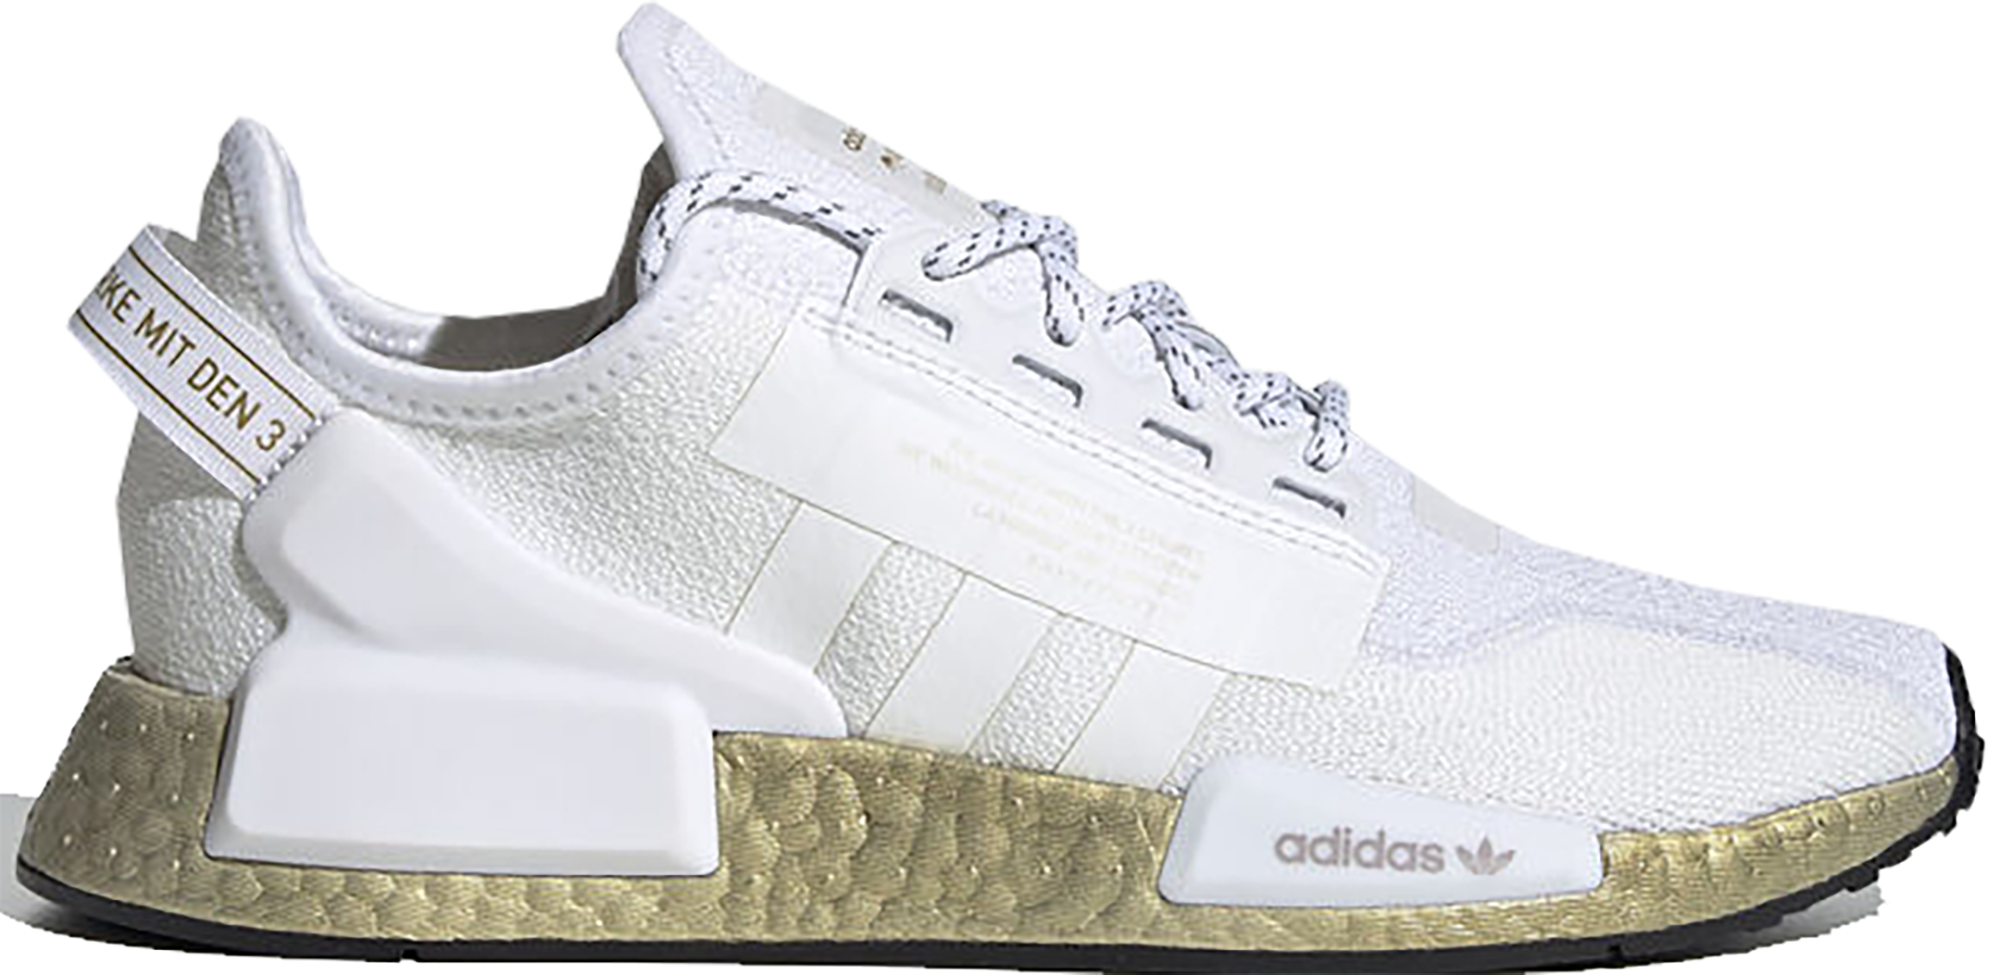 nmds white and gold